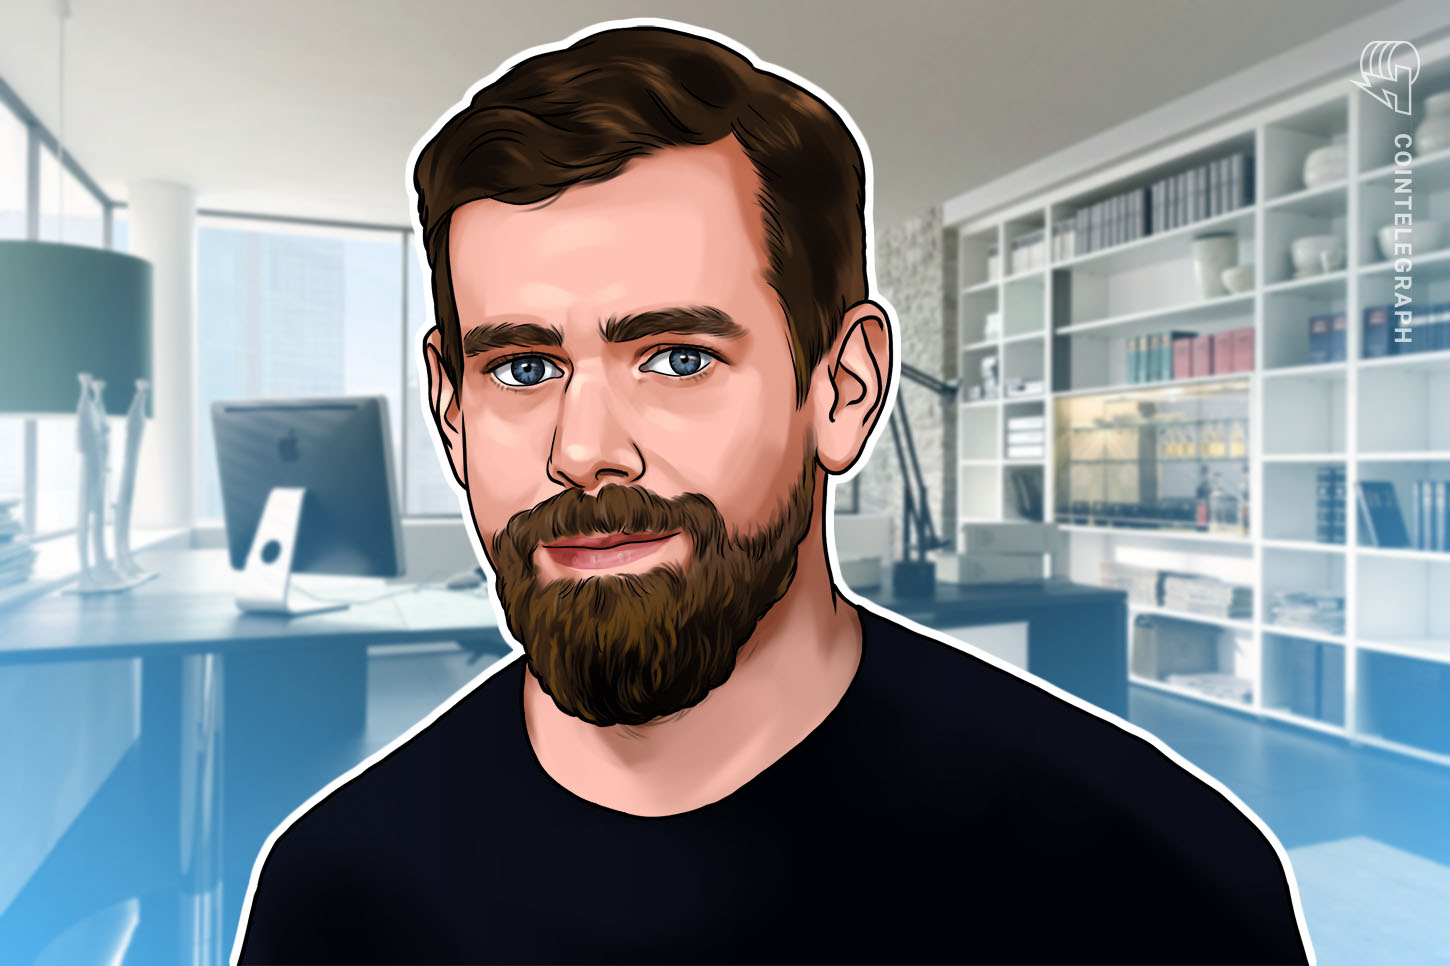 Jack Dorsey warns that FinCEN rules will drive crypto customers offshore